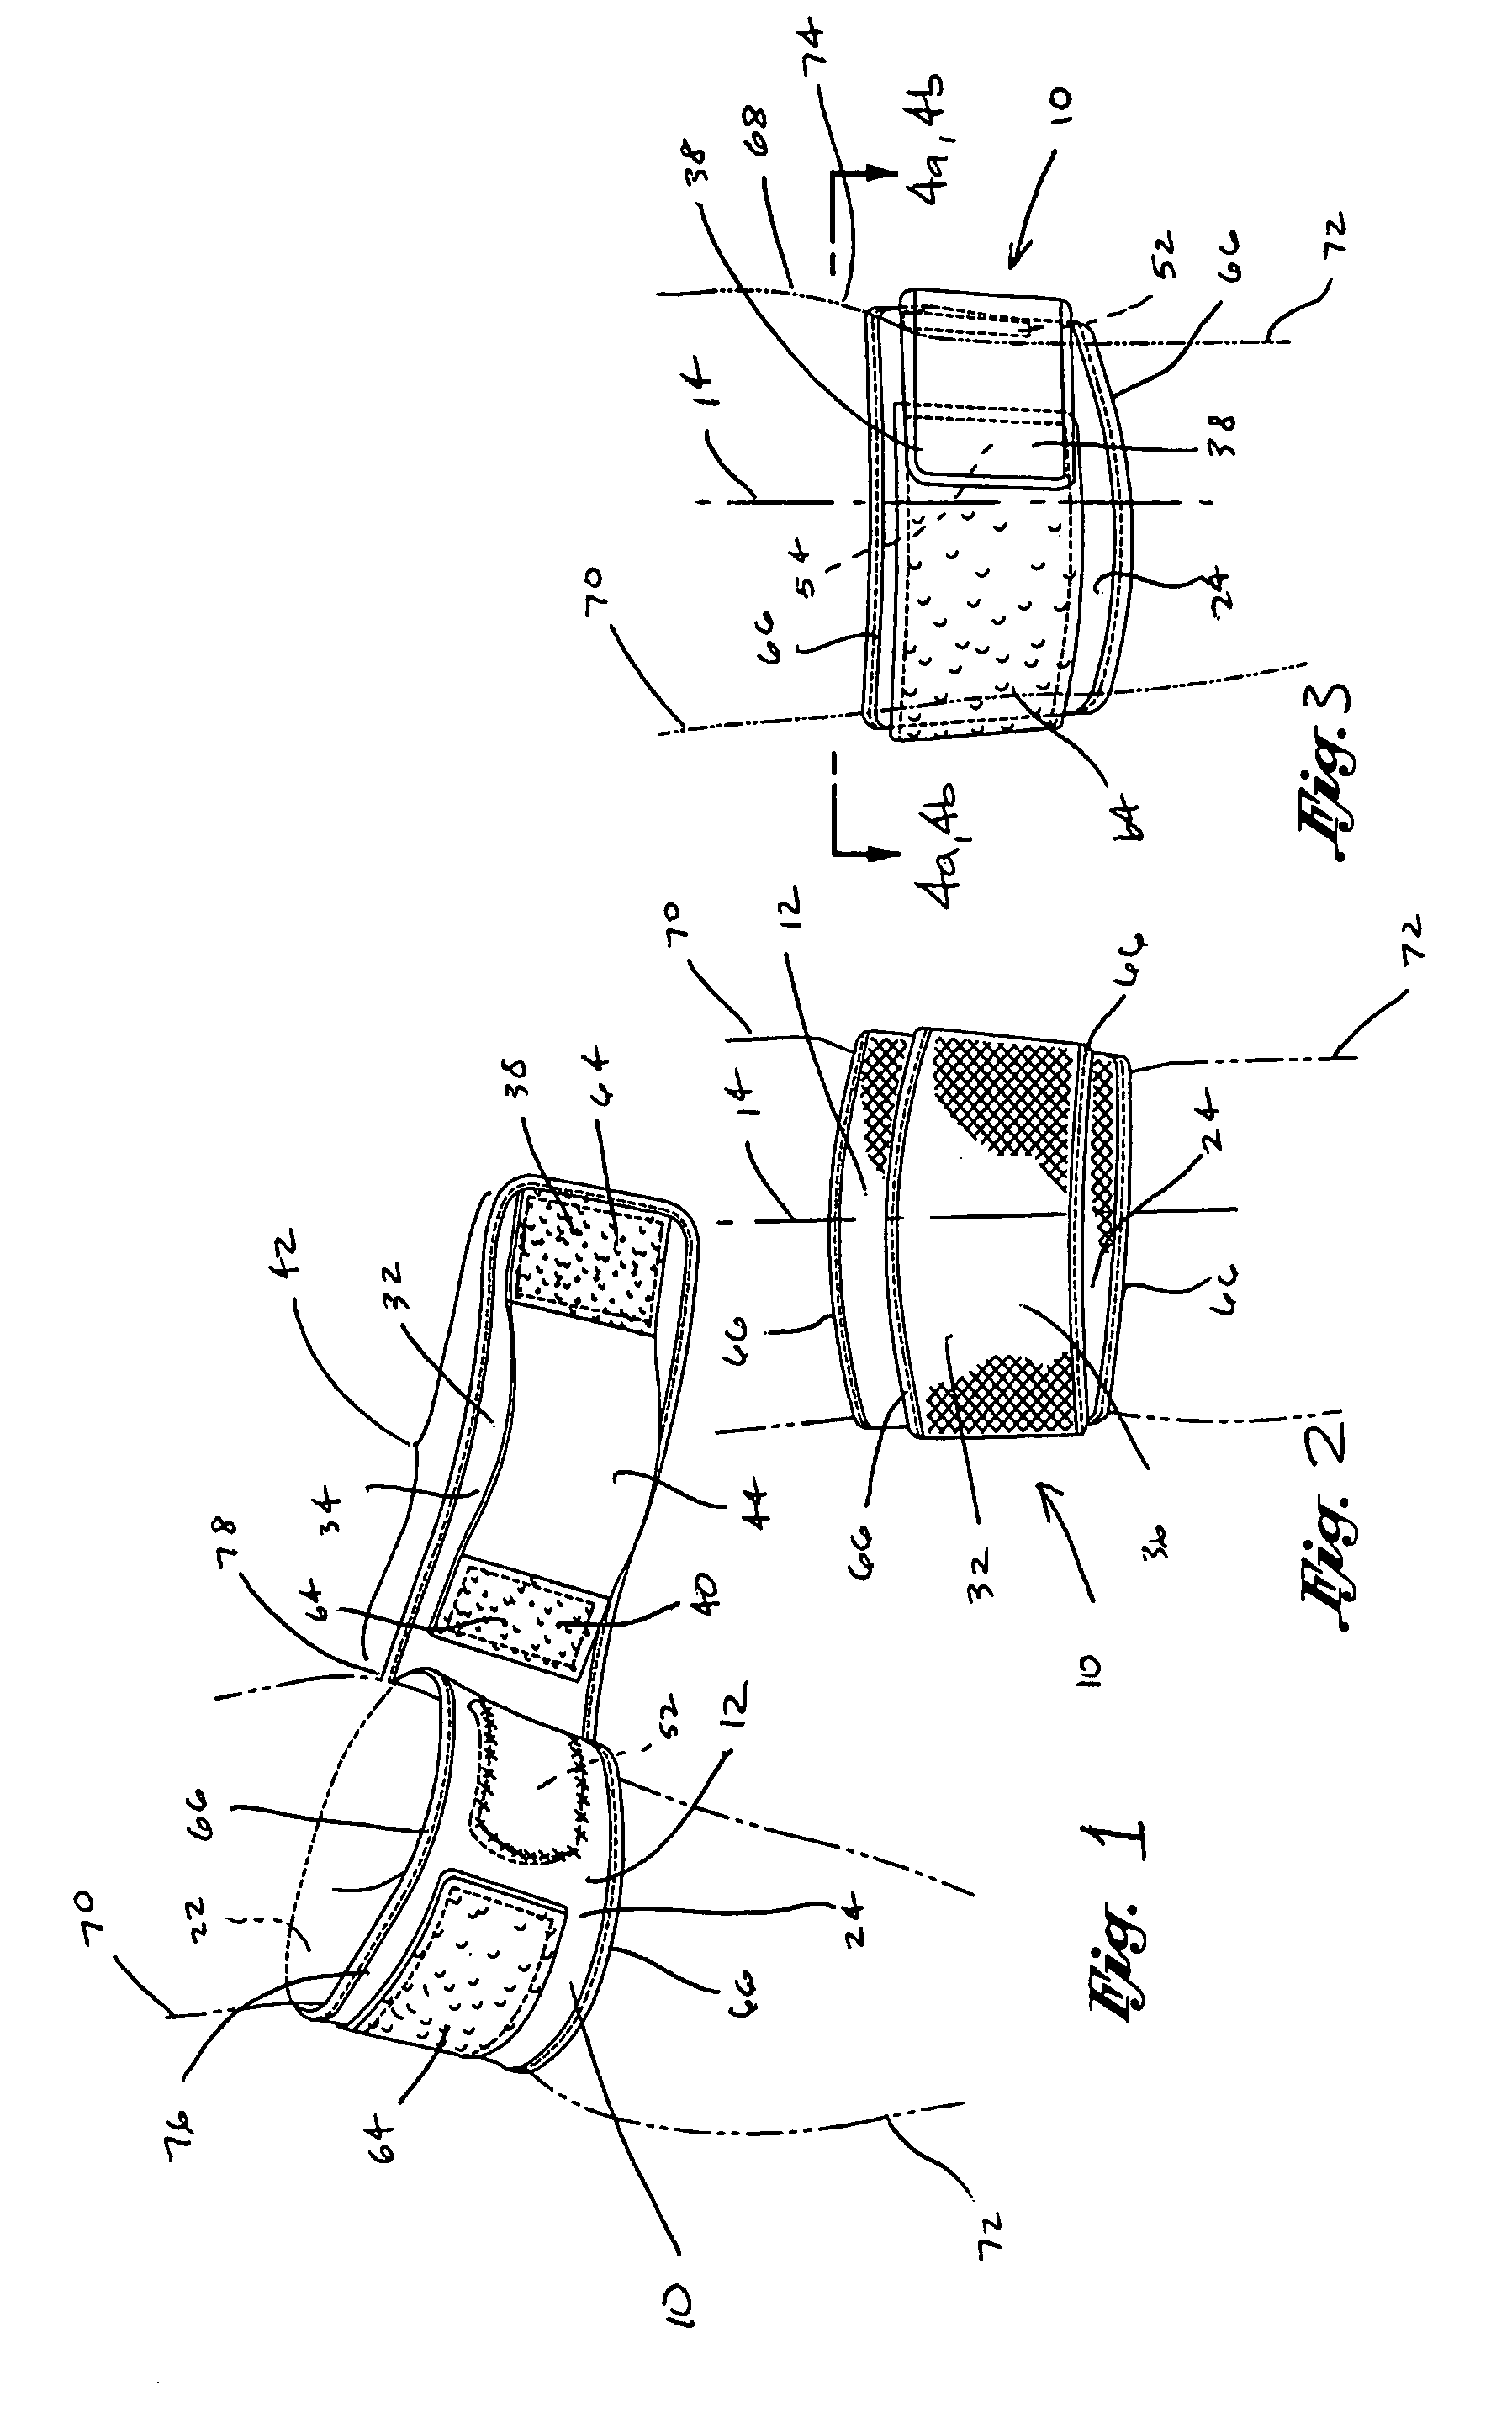 Neuromusculoskeletal knee support device